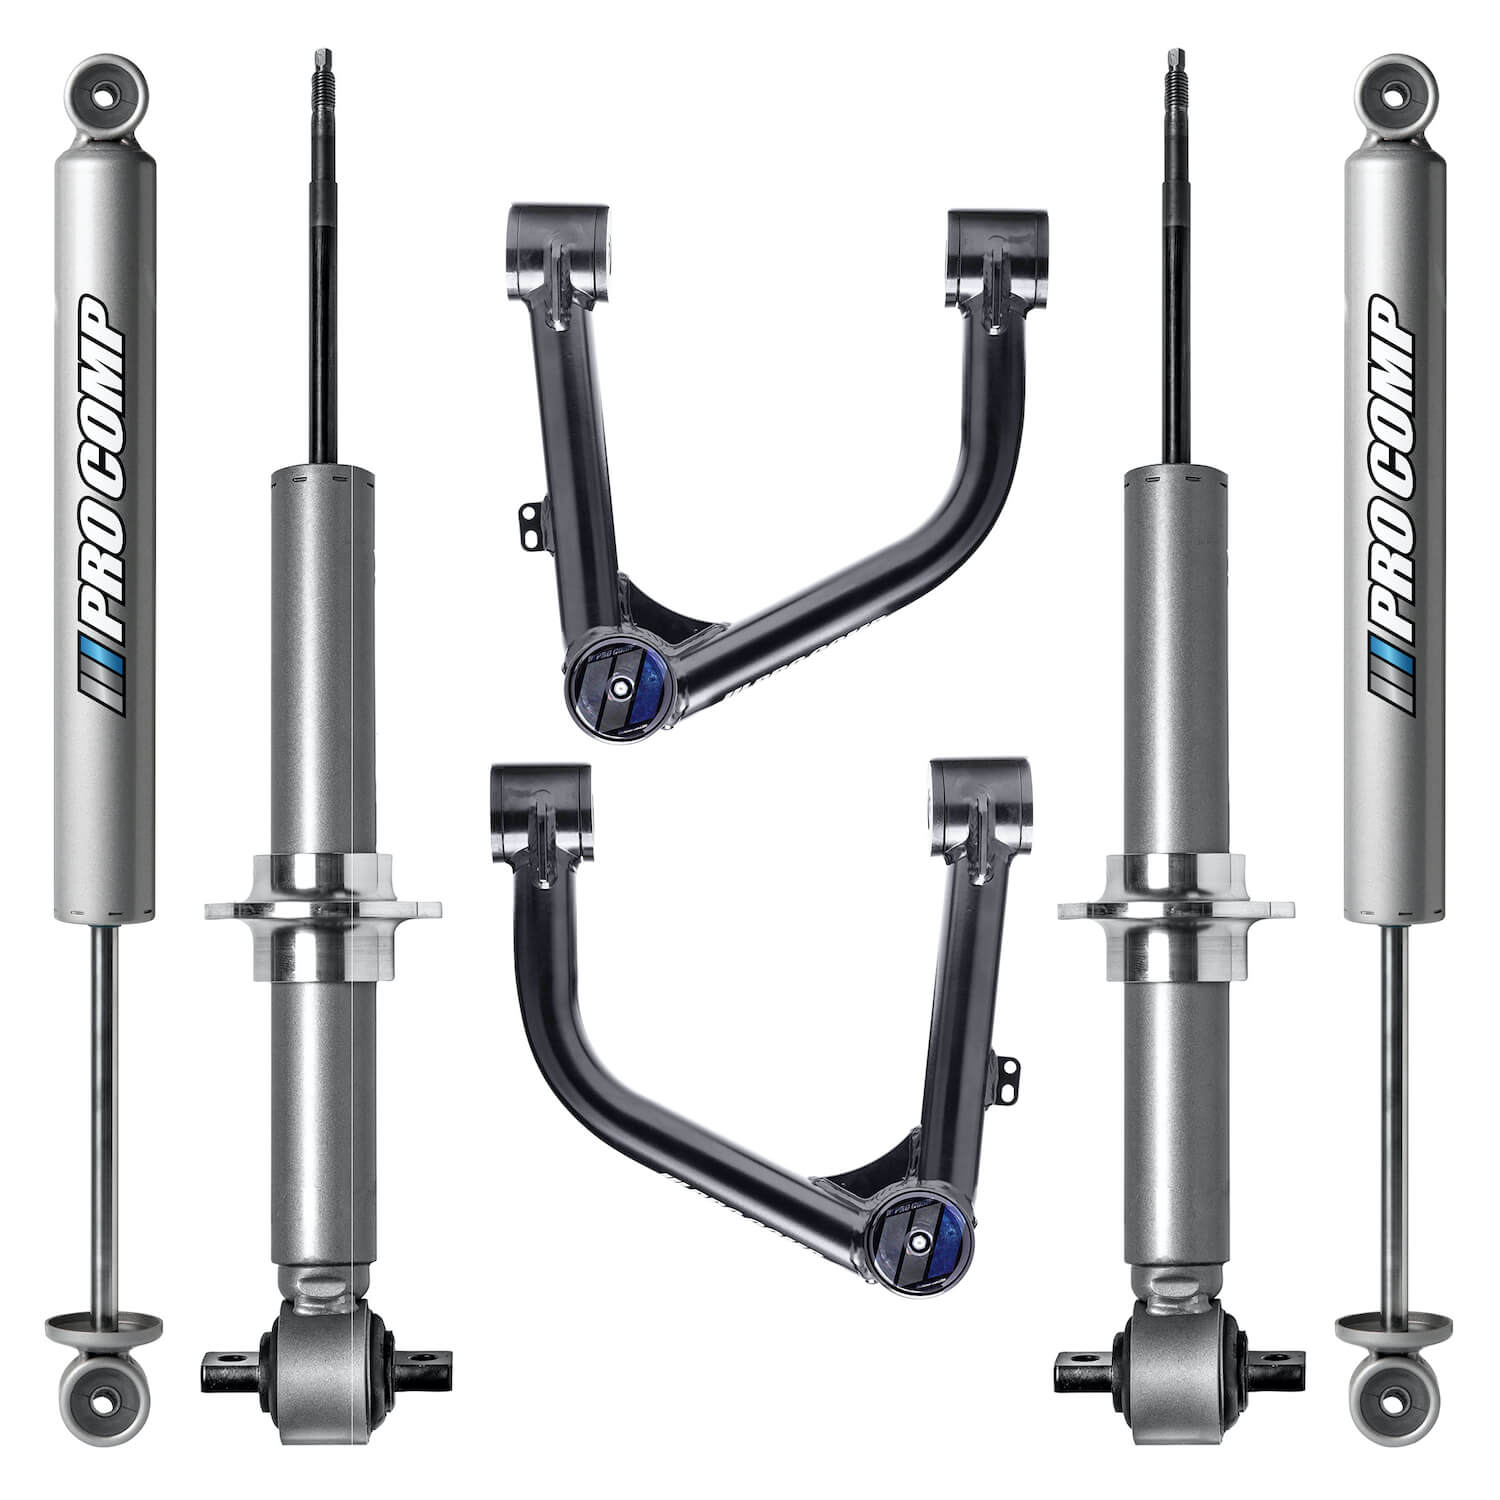 08 Pro Comp Explorer Standard LCG Suspension Kit with Pro Series Upper Control Arms